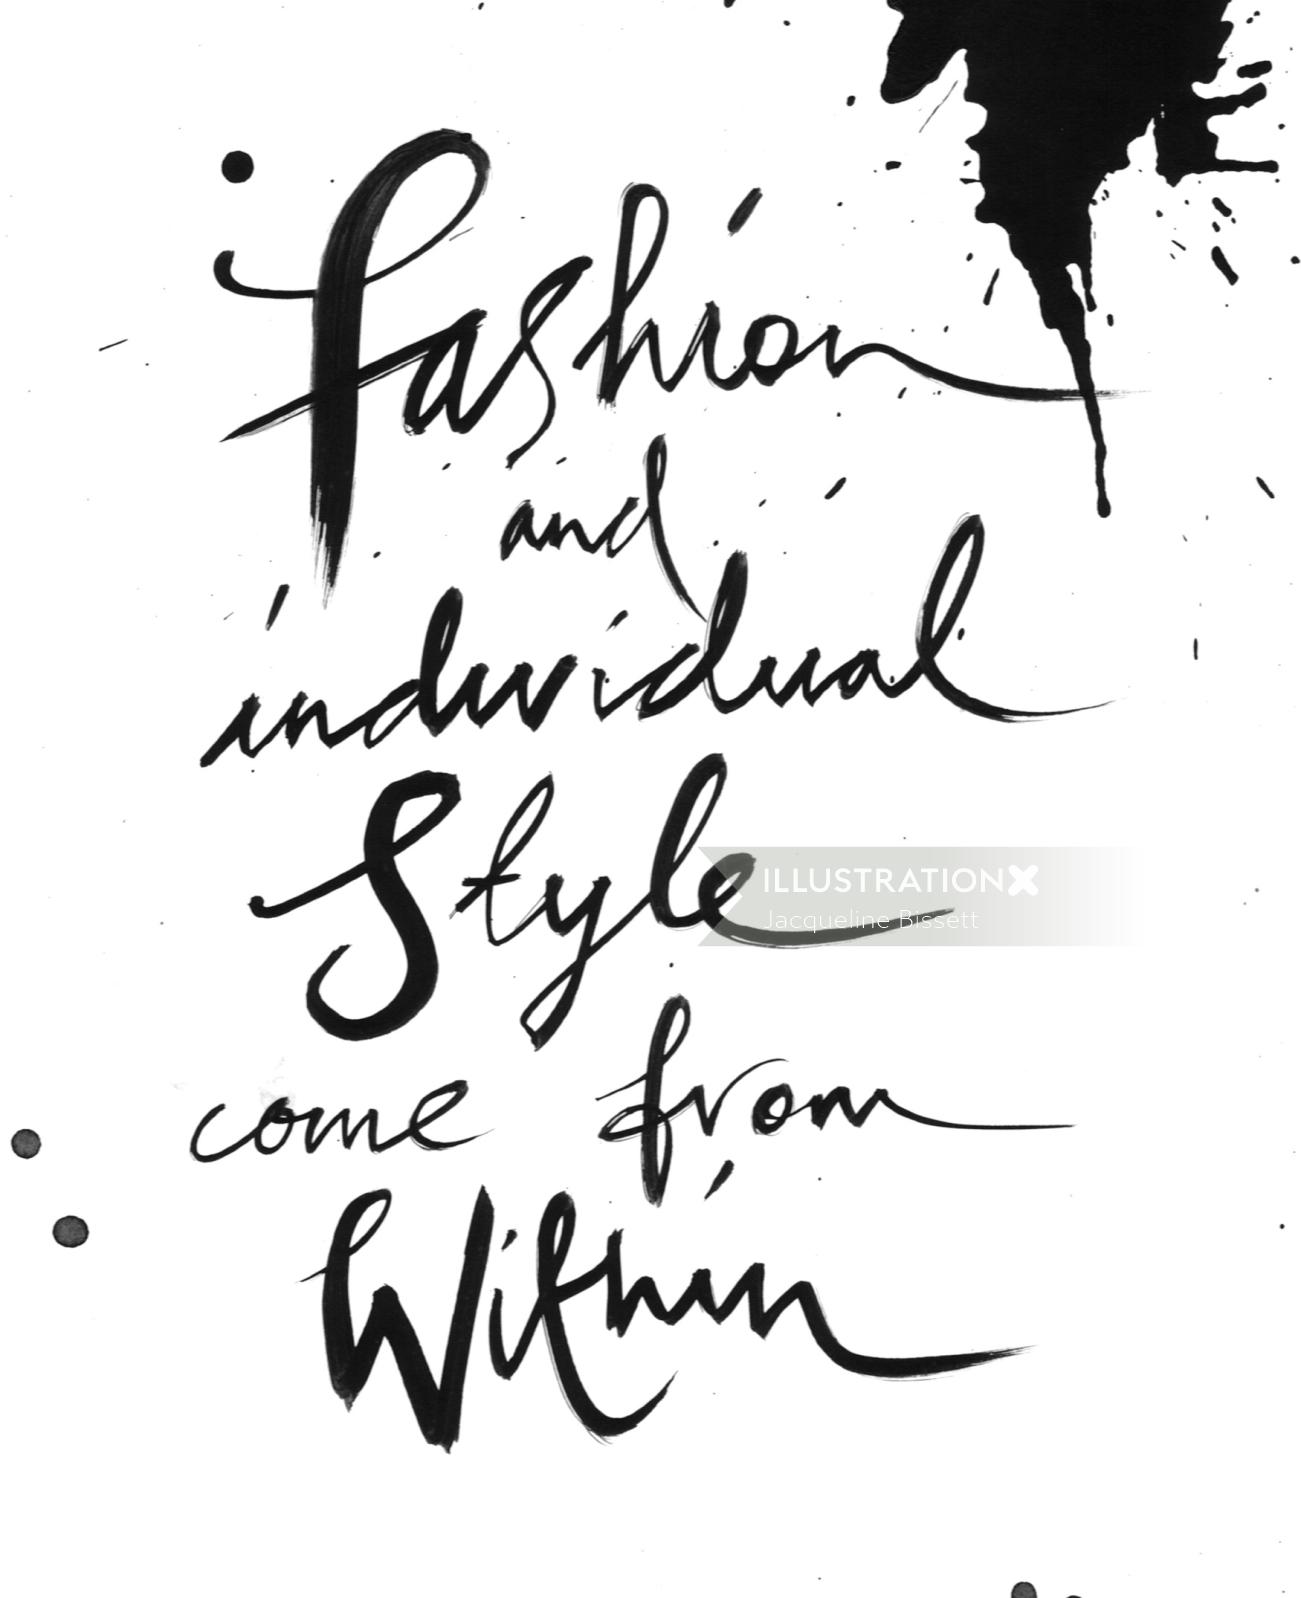 Lettering illustration about fashion